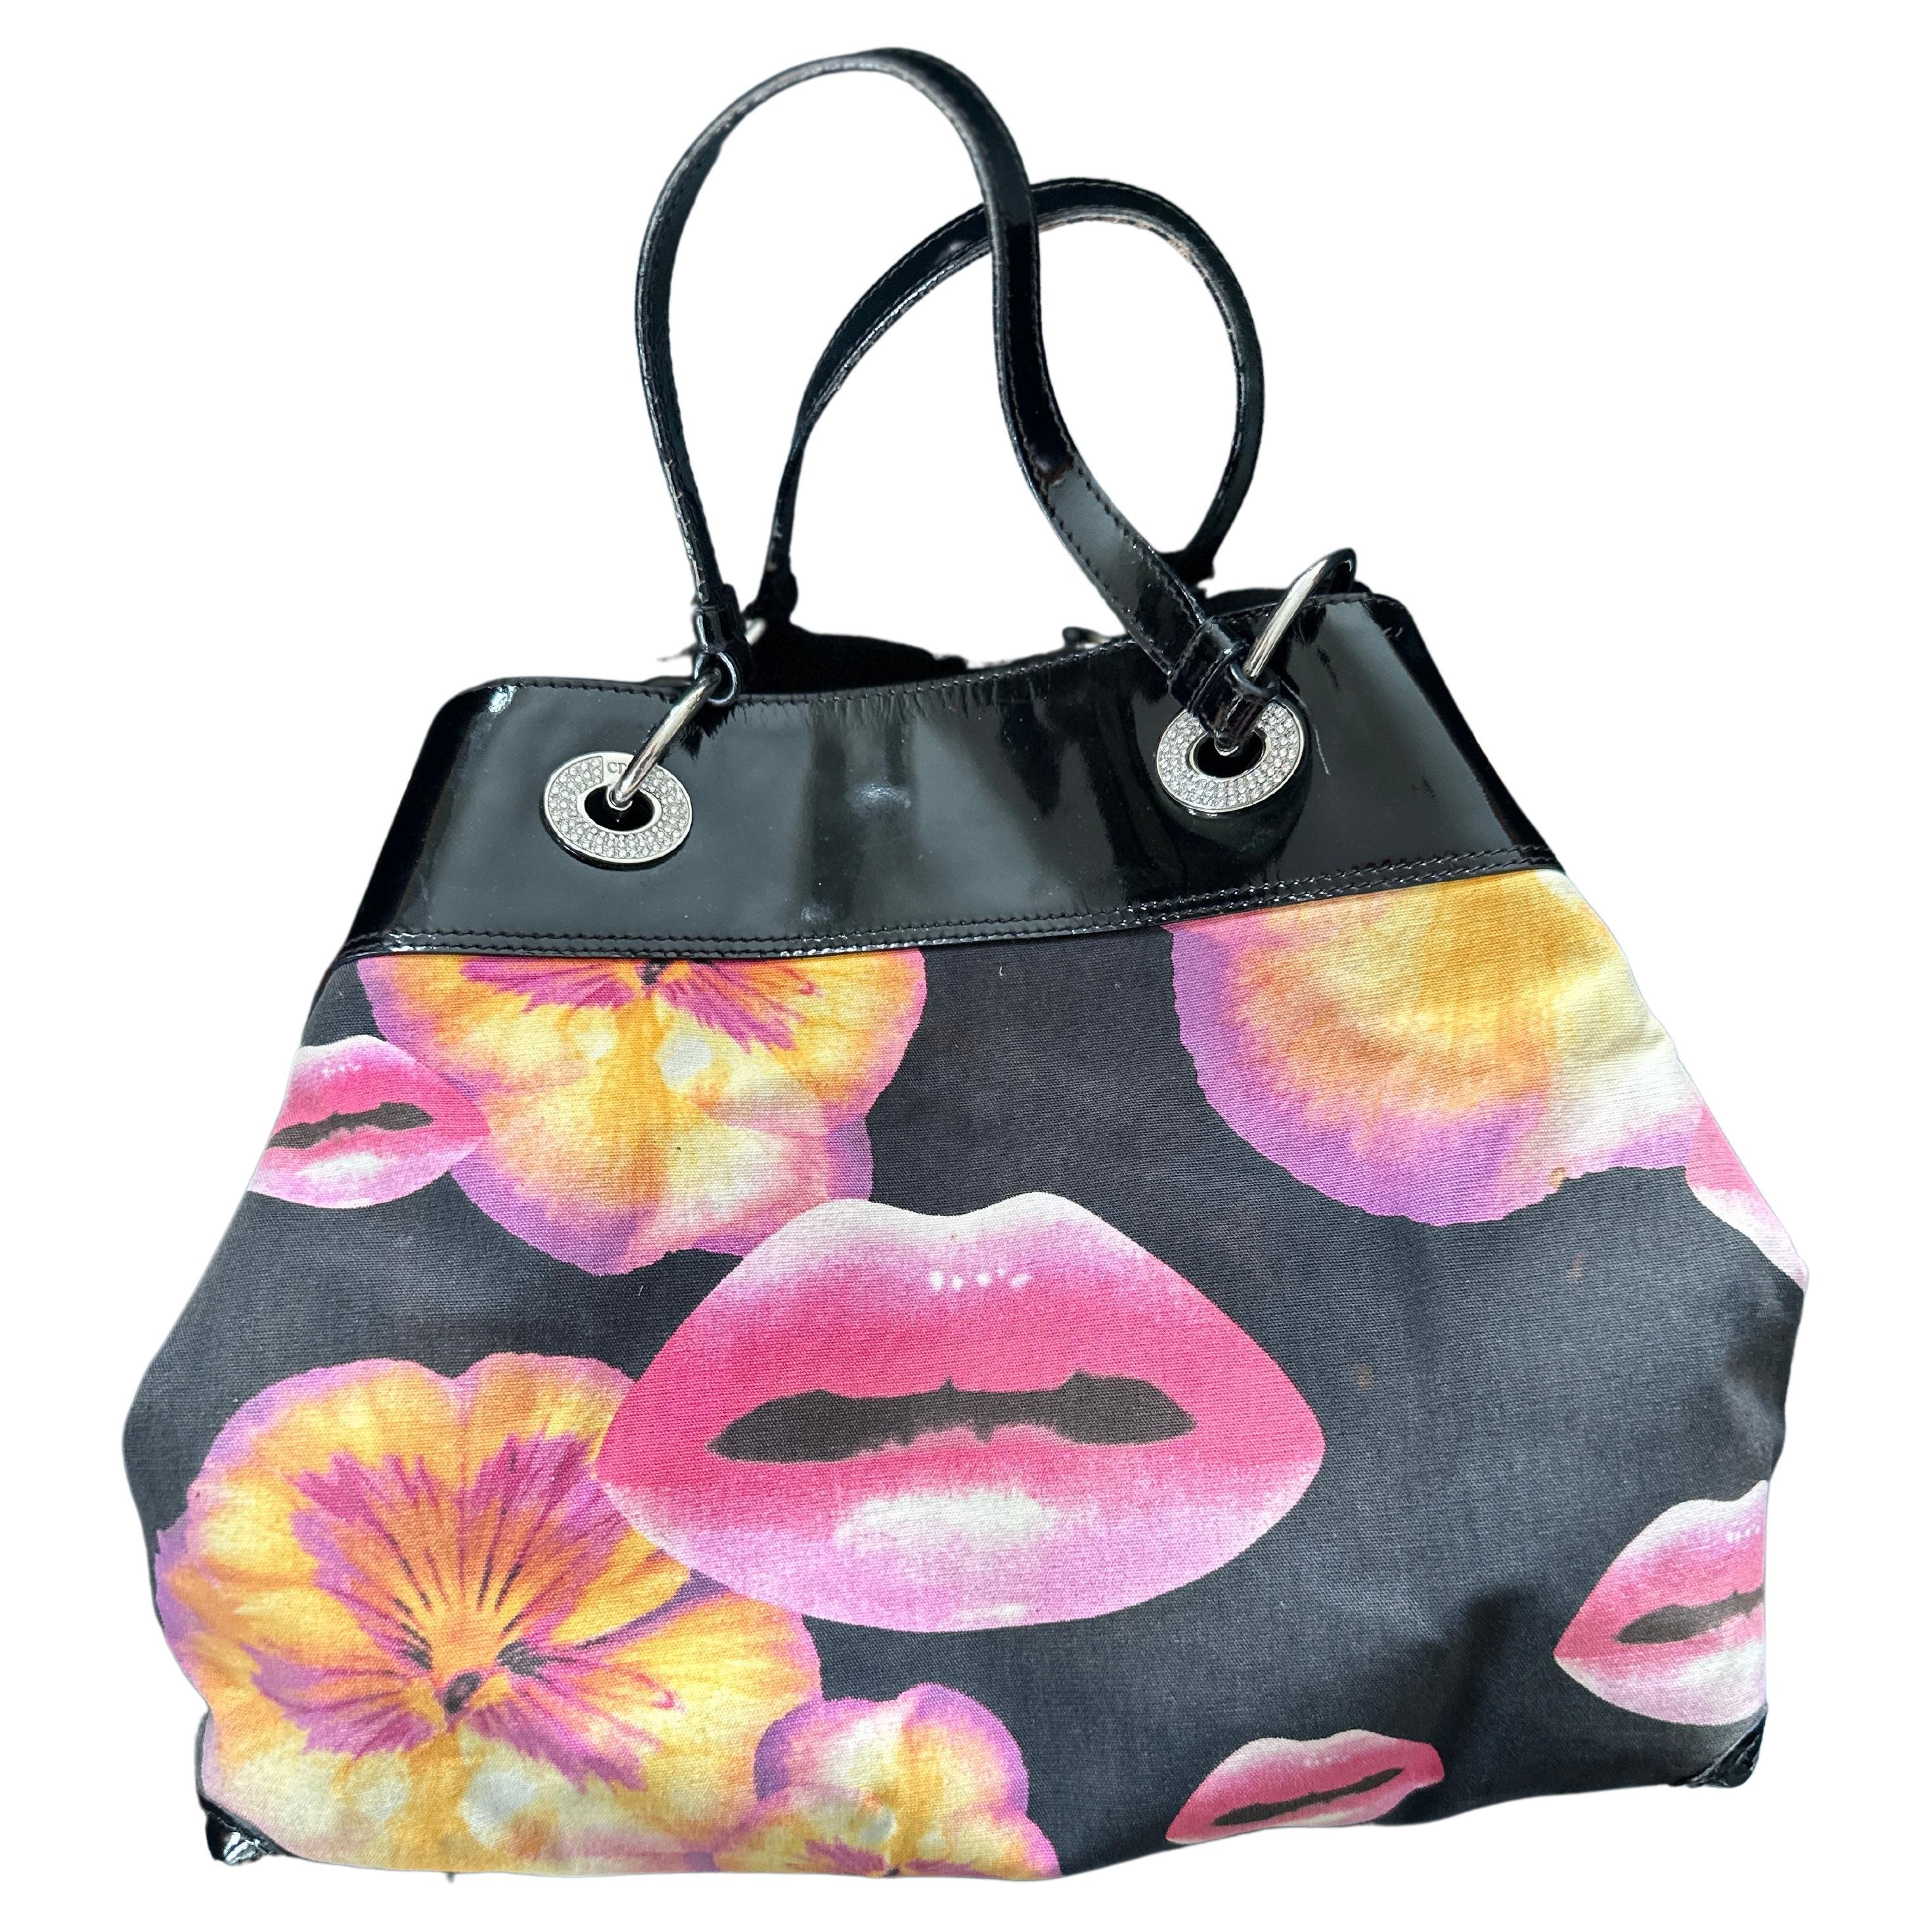 Christian Dior Spring 2005 Surreal Lips and Pansy Print Bag by John Galliano For Sale